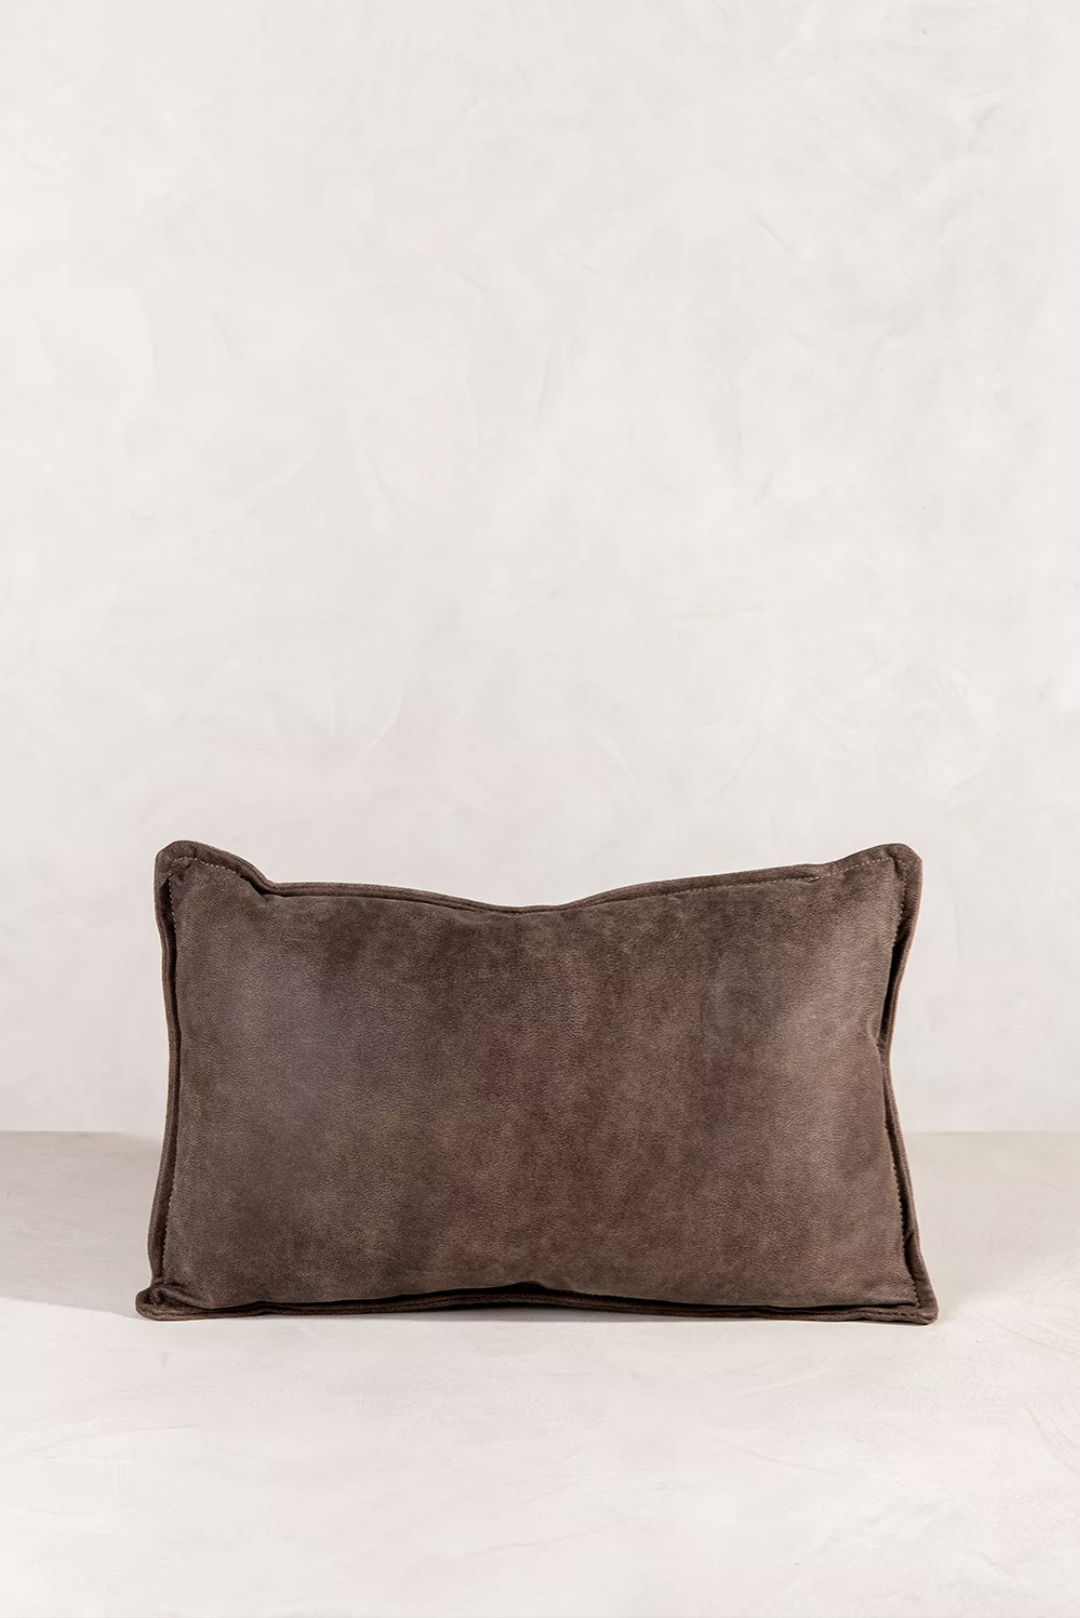 RUBBED LEATHER PILLOW – L